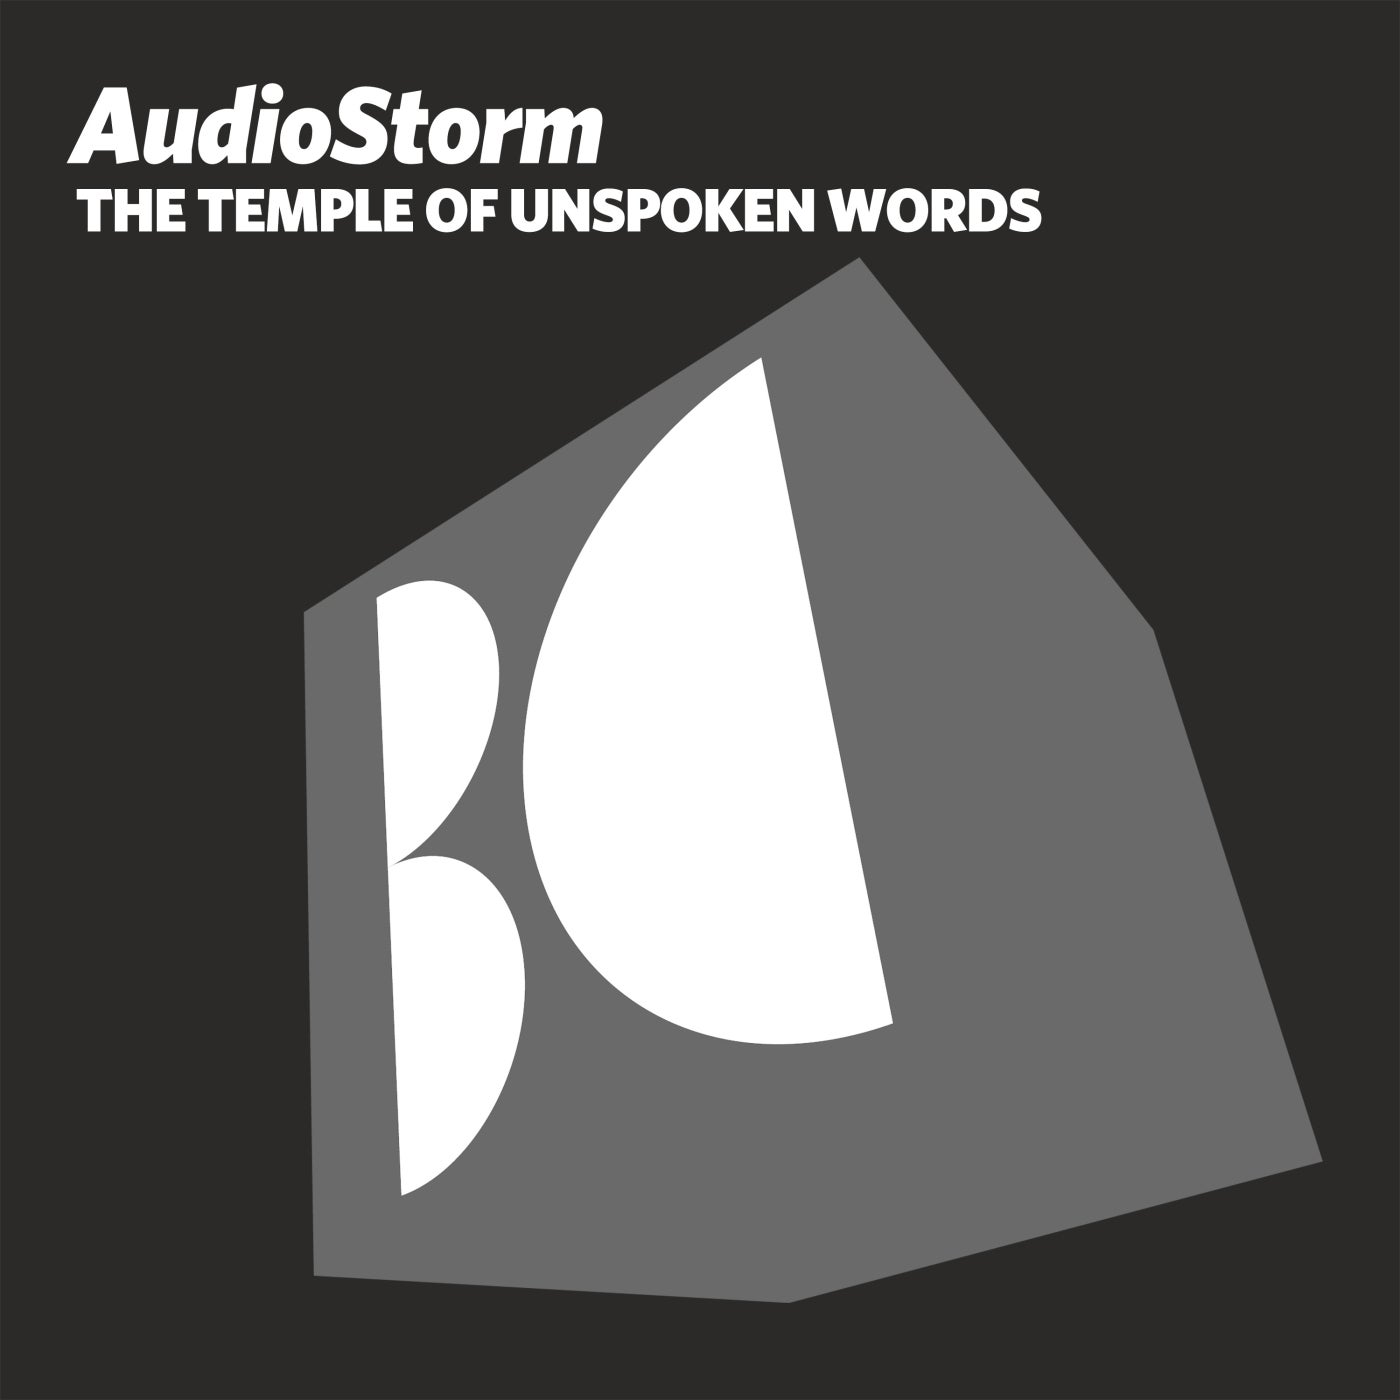 The Temple of Unspoken Words